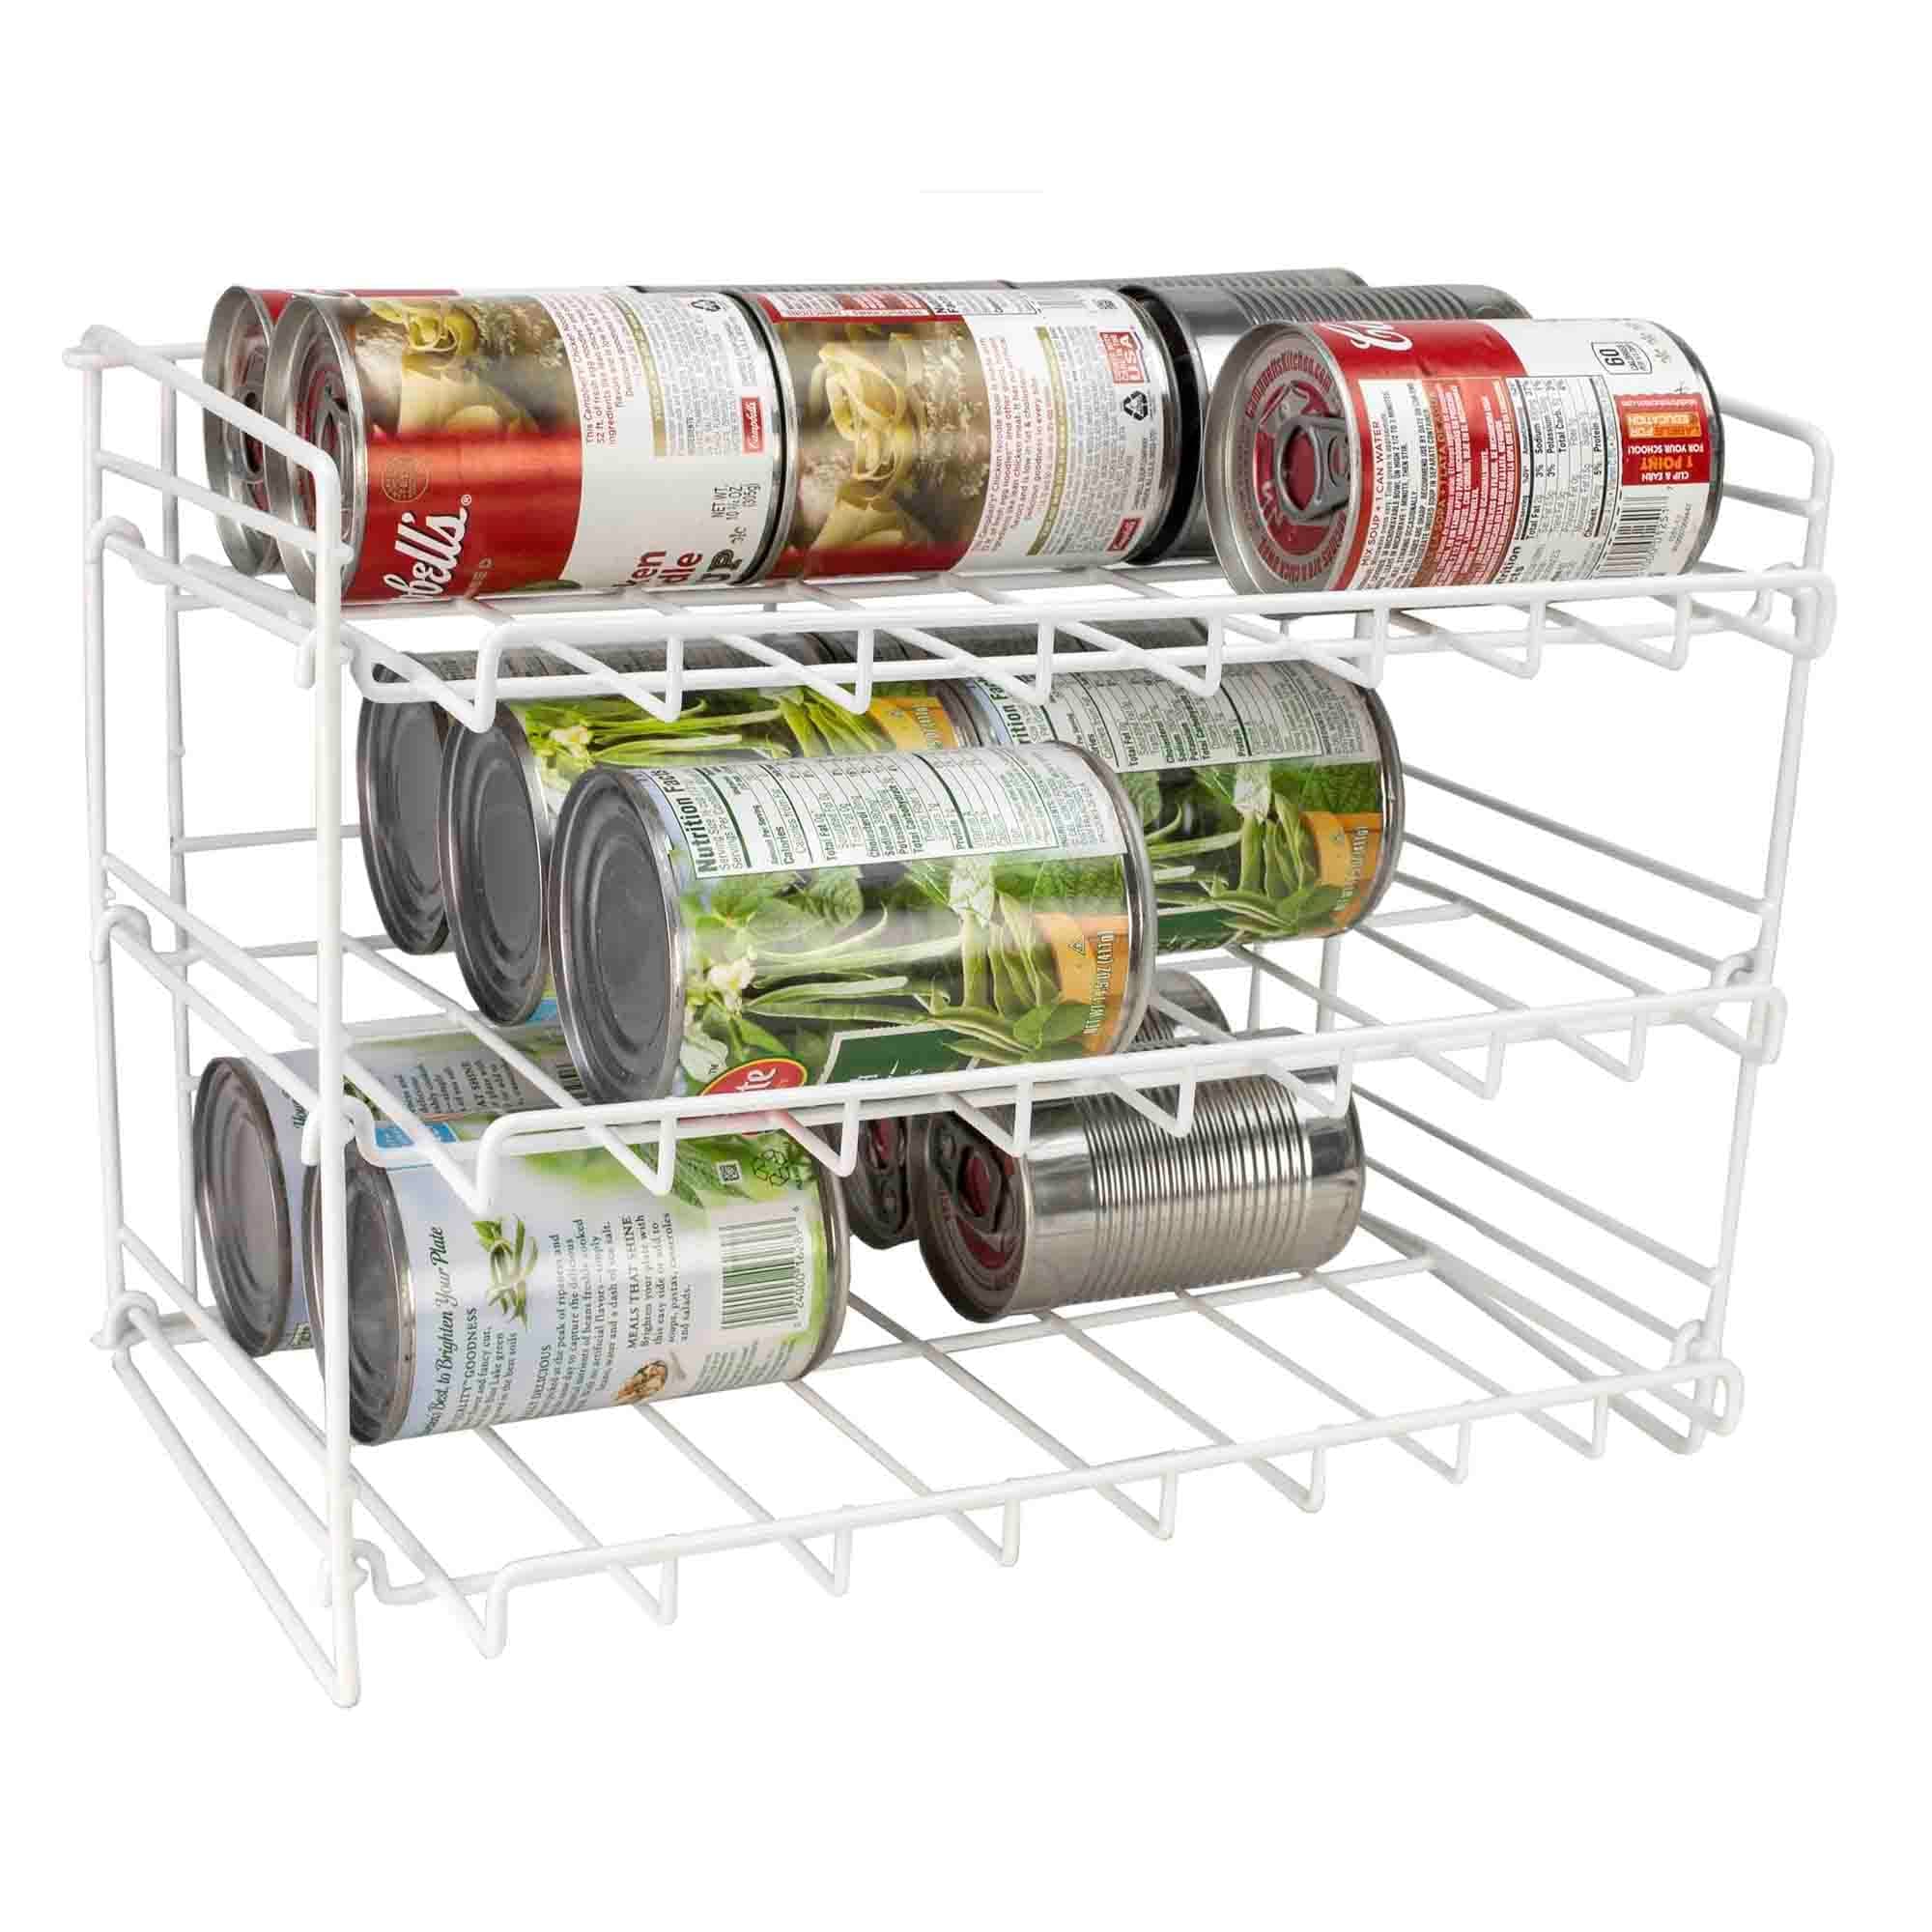 Home Basics 3-Tier Can Organizer $10.00 EACH, CASE PACK OF 6